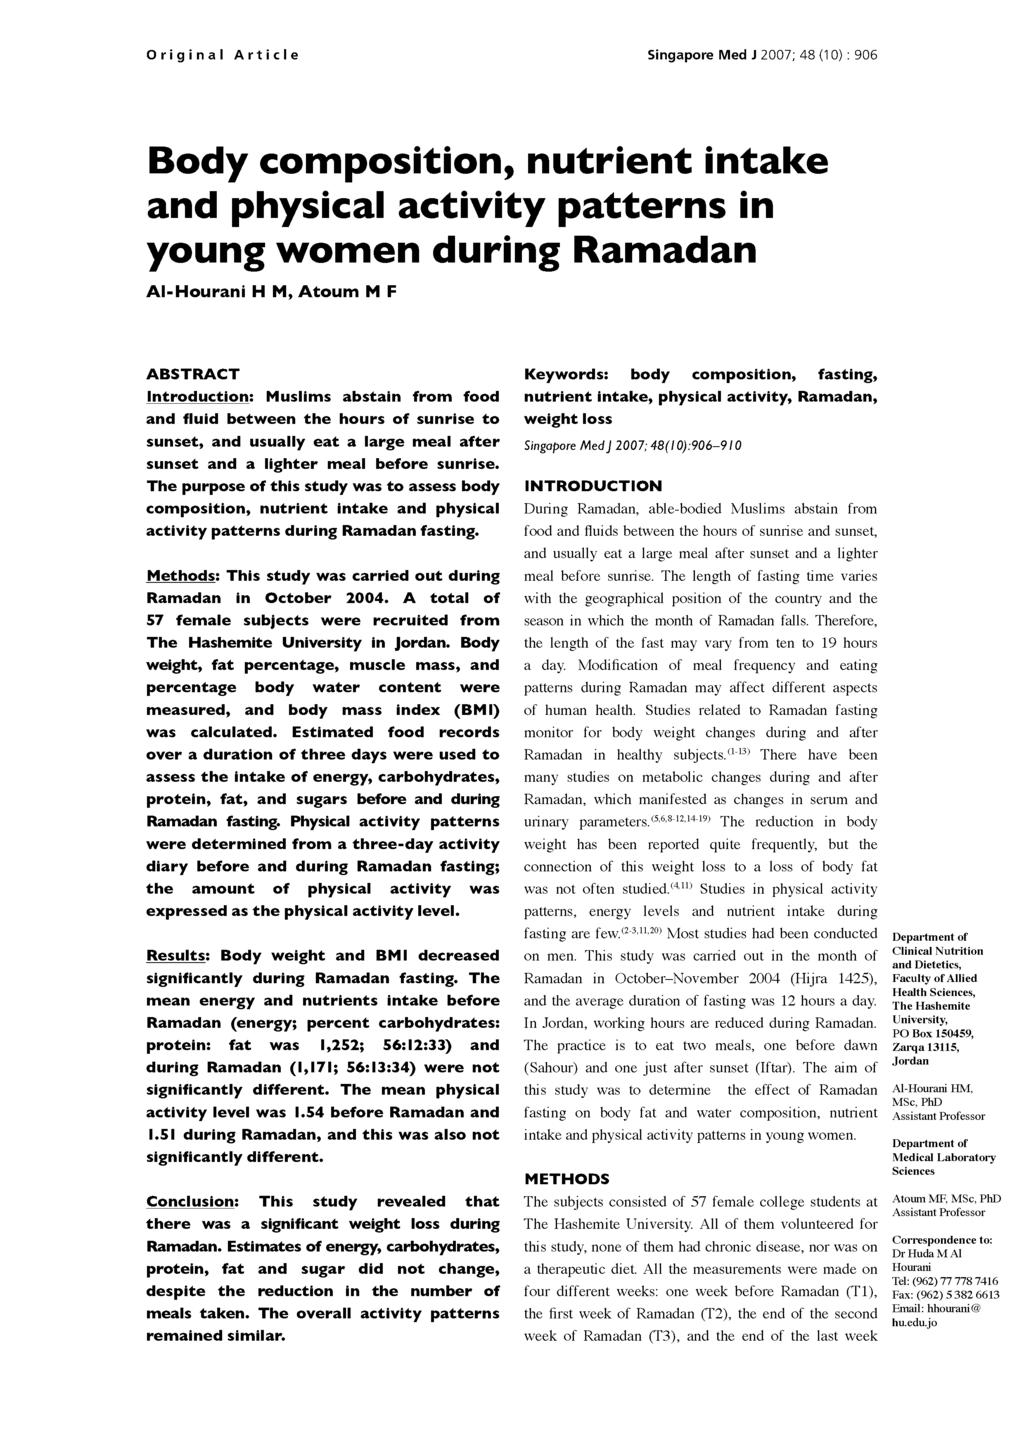 906 Original Article Body composition, nutrient intake and physical activity patterns in young women during Ramadan AI-Hourani H M, Atoum M F ABSTRACT Introduction: Muslims abstain from food and